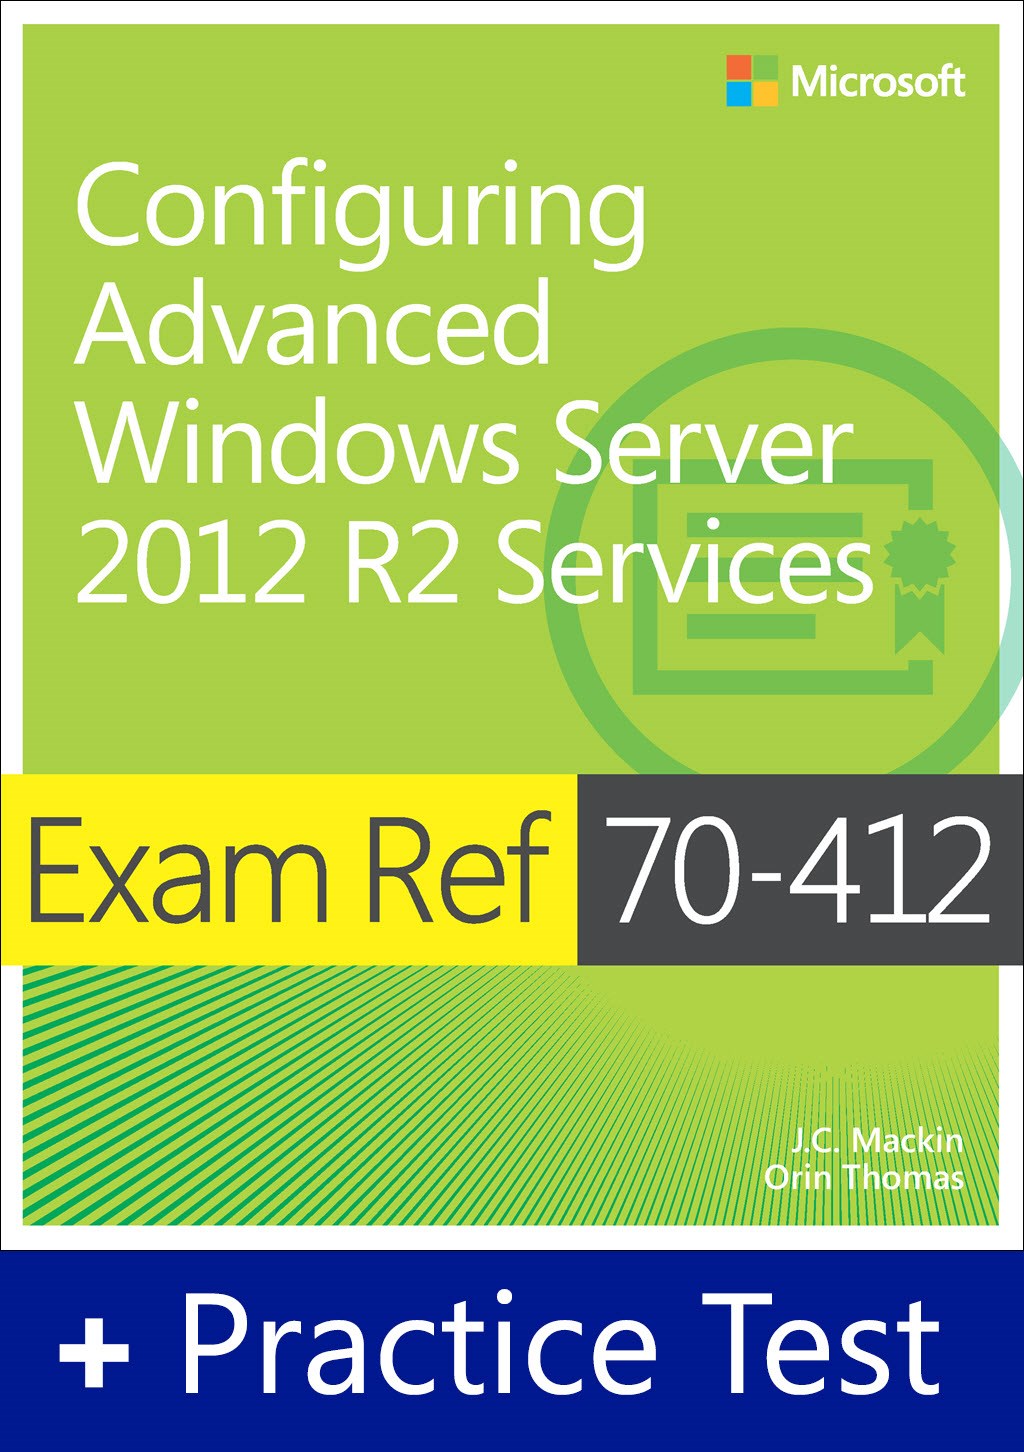 Exam Ref 70-412 Configuring Advanced Windows Server 2012 R2 Services with Practice Test